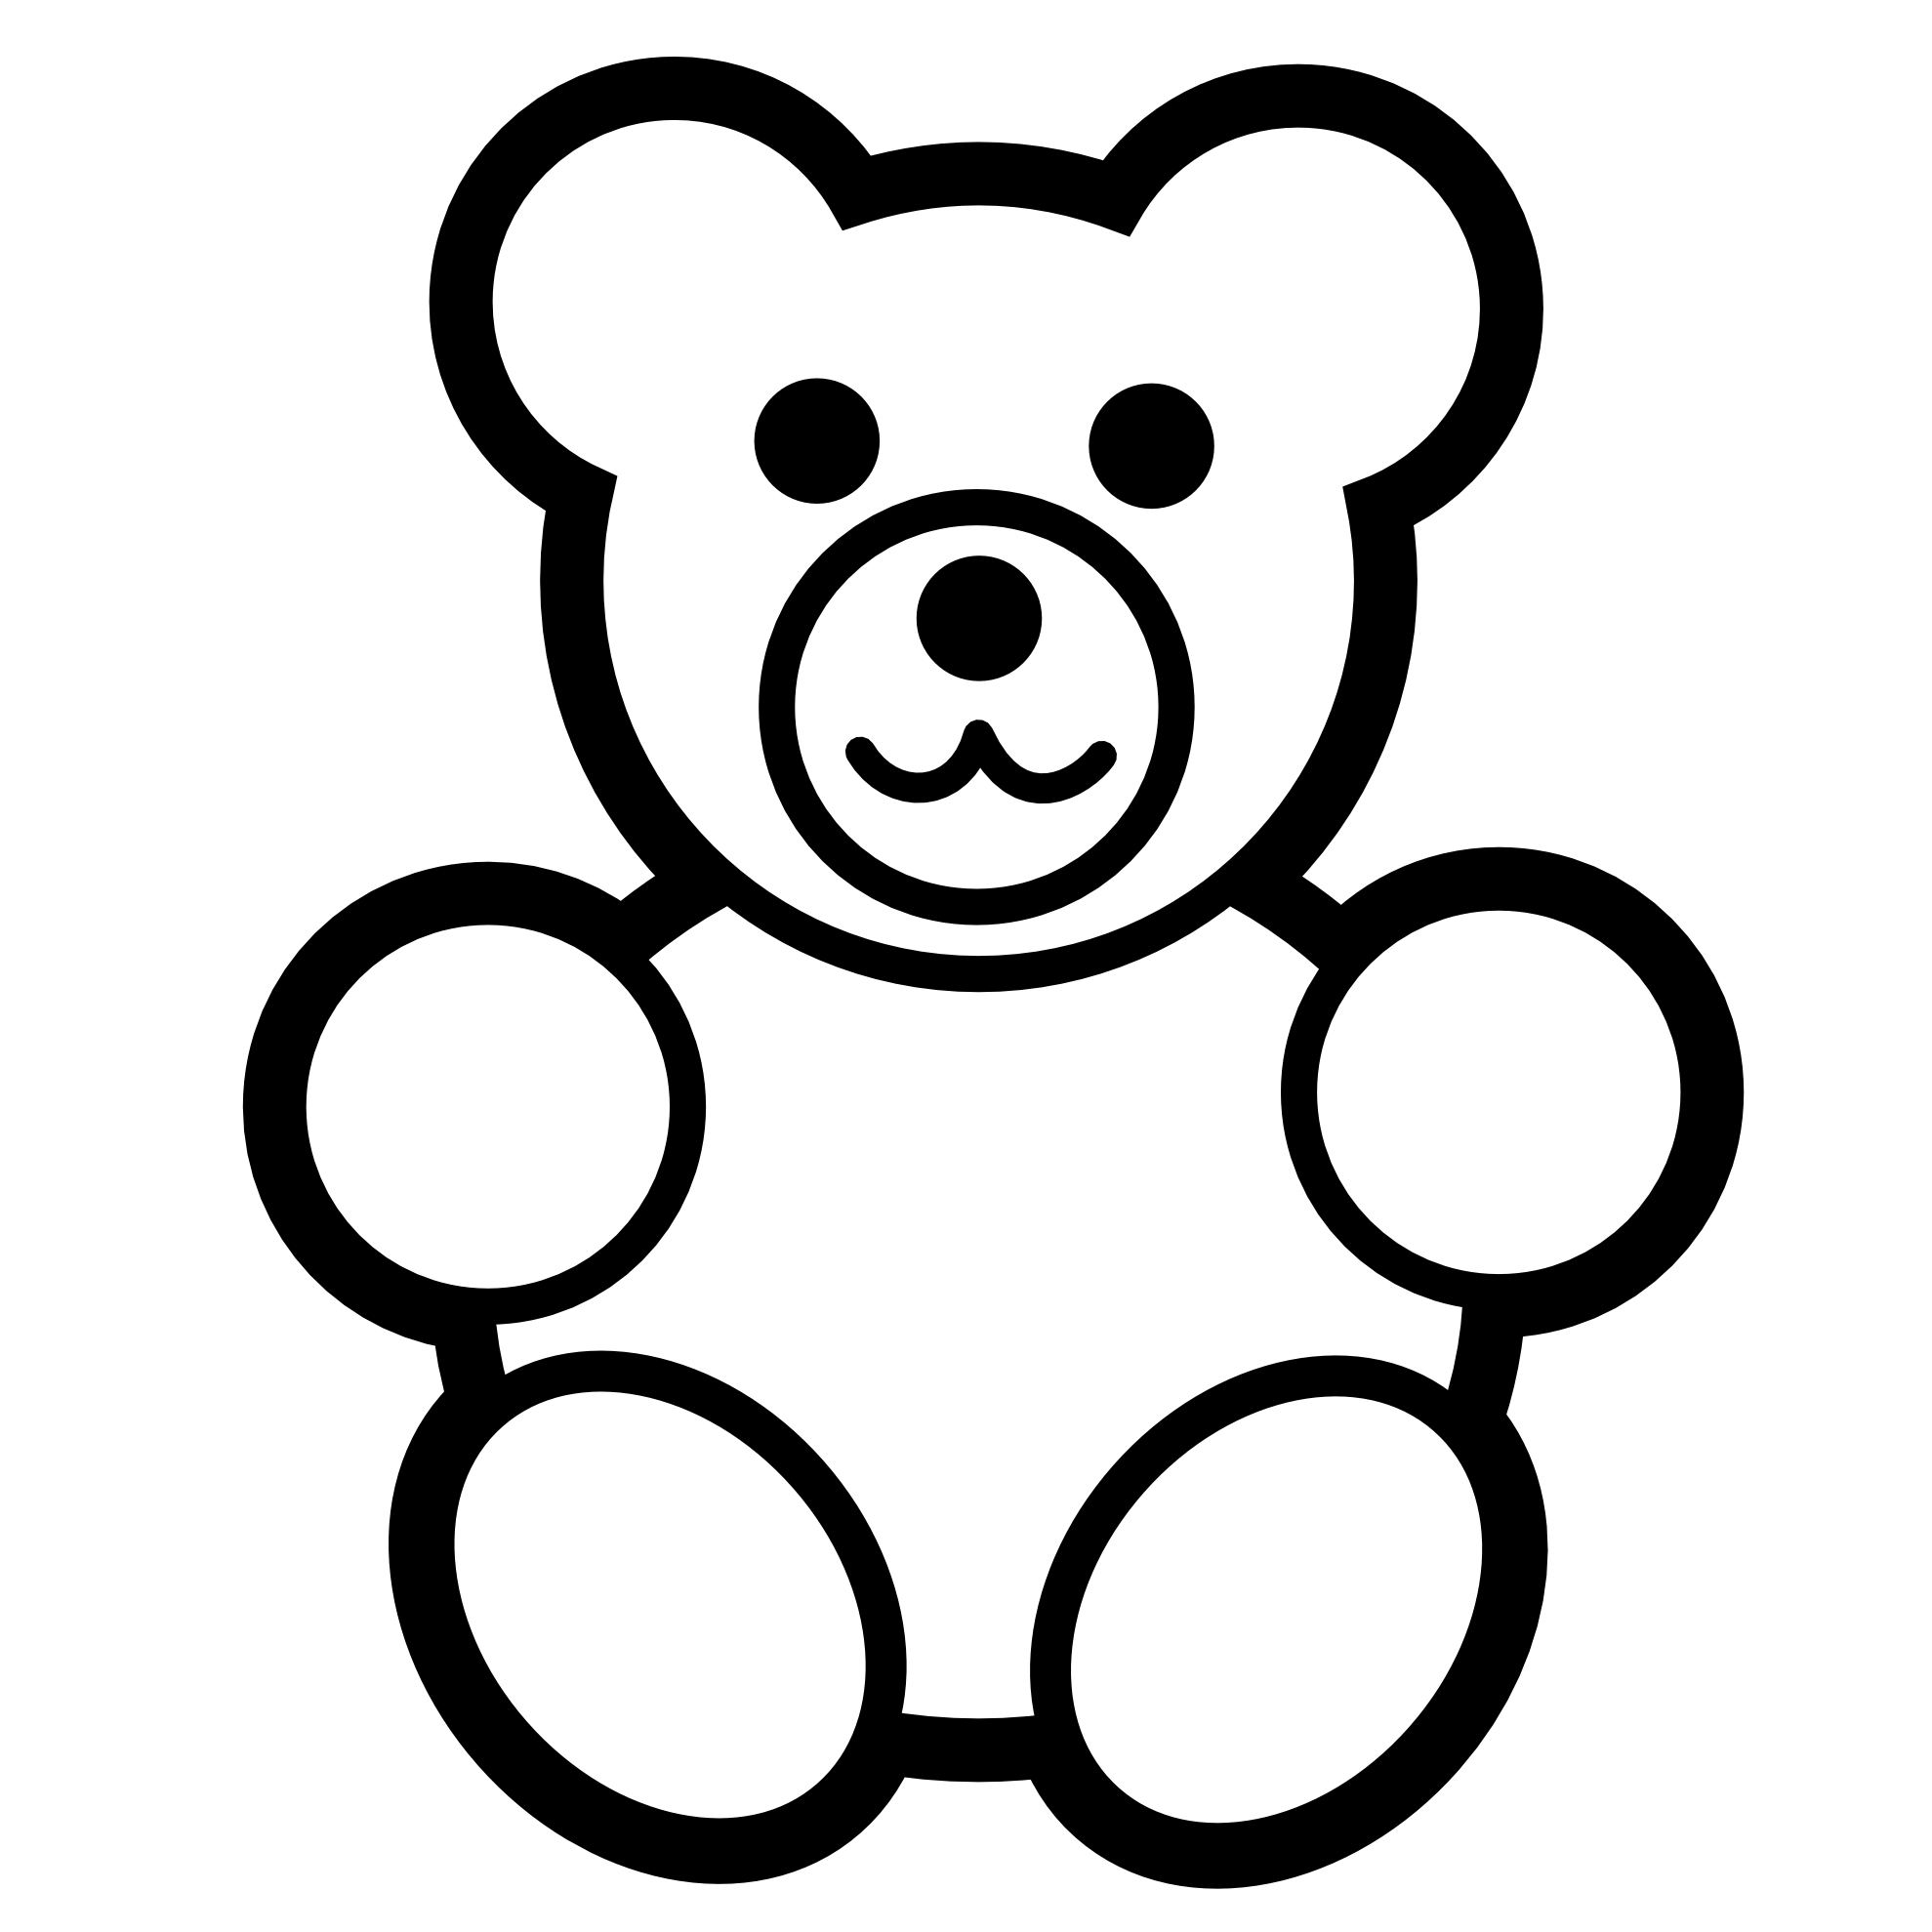 10 Clip Art Teddy Bear Outline Free Cliparts That You Can Download To